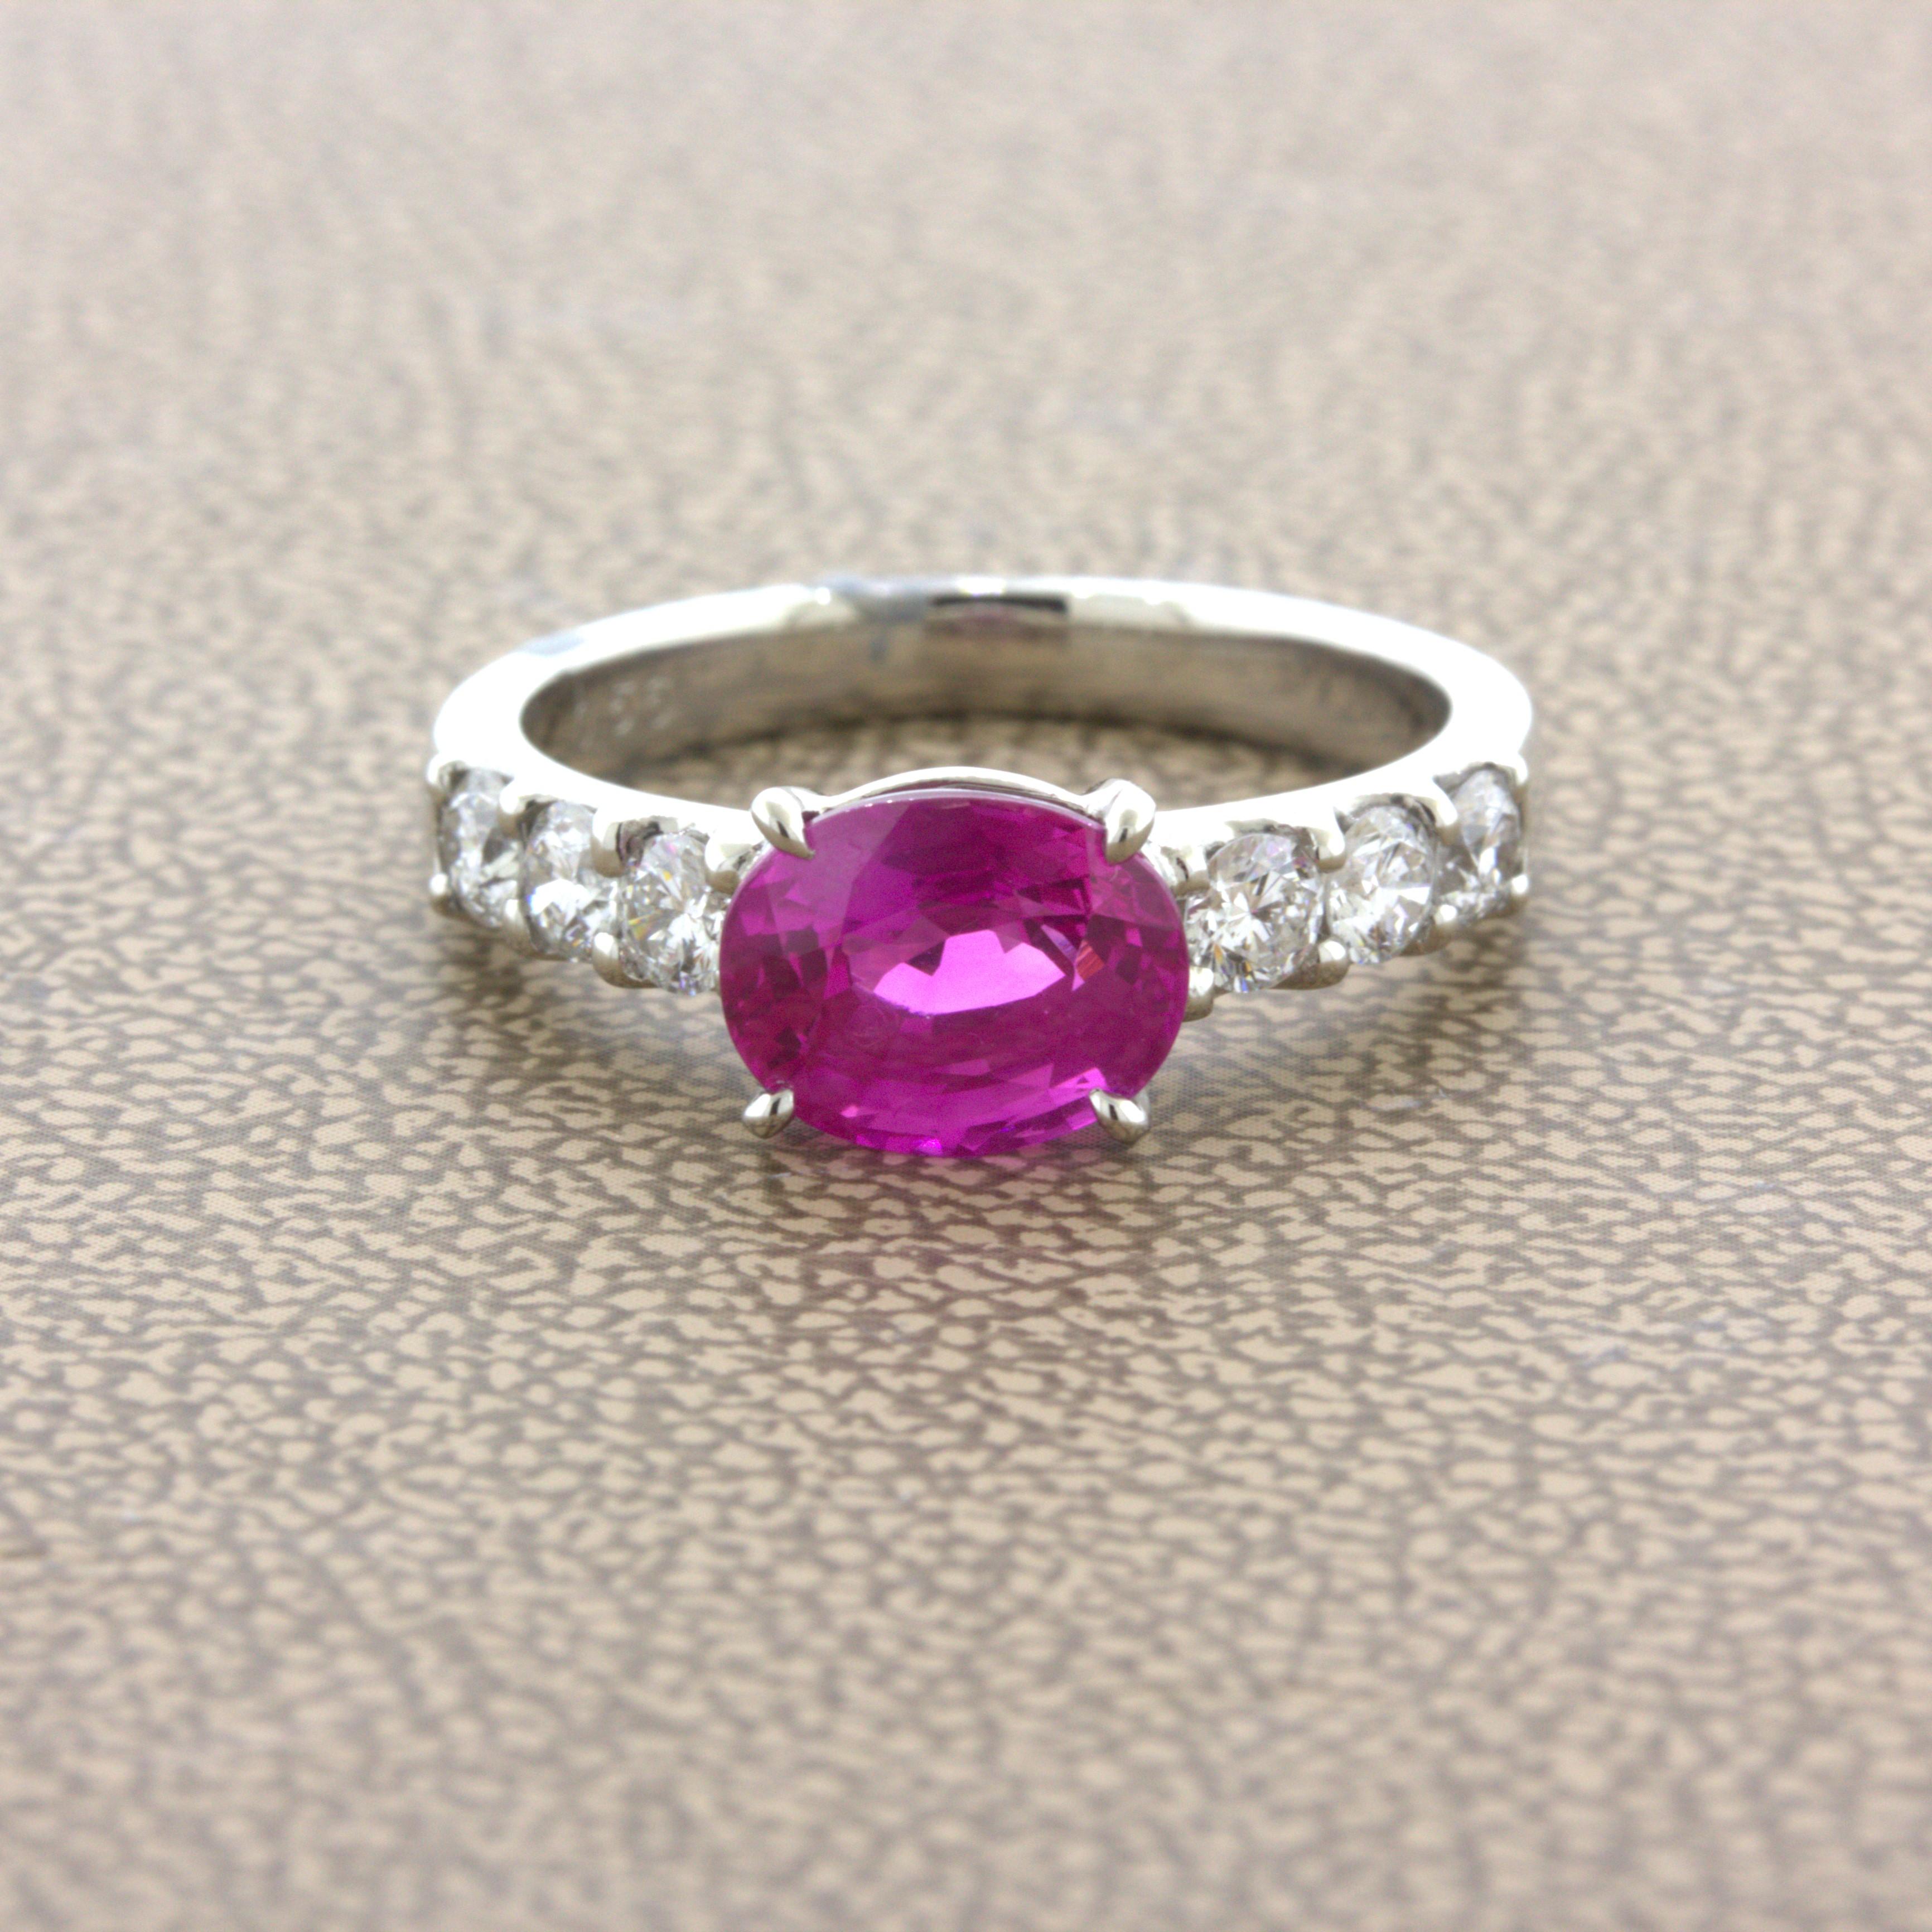 A super fine top-gem pink sapphire with outstanding vivid color. It weighs 2.36 carats and has an intense hot-pink color that is exceptionally strong and fine. It has a lovely oval-shape and is certified by the GIA as natural. Complementing the gem